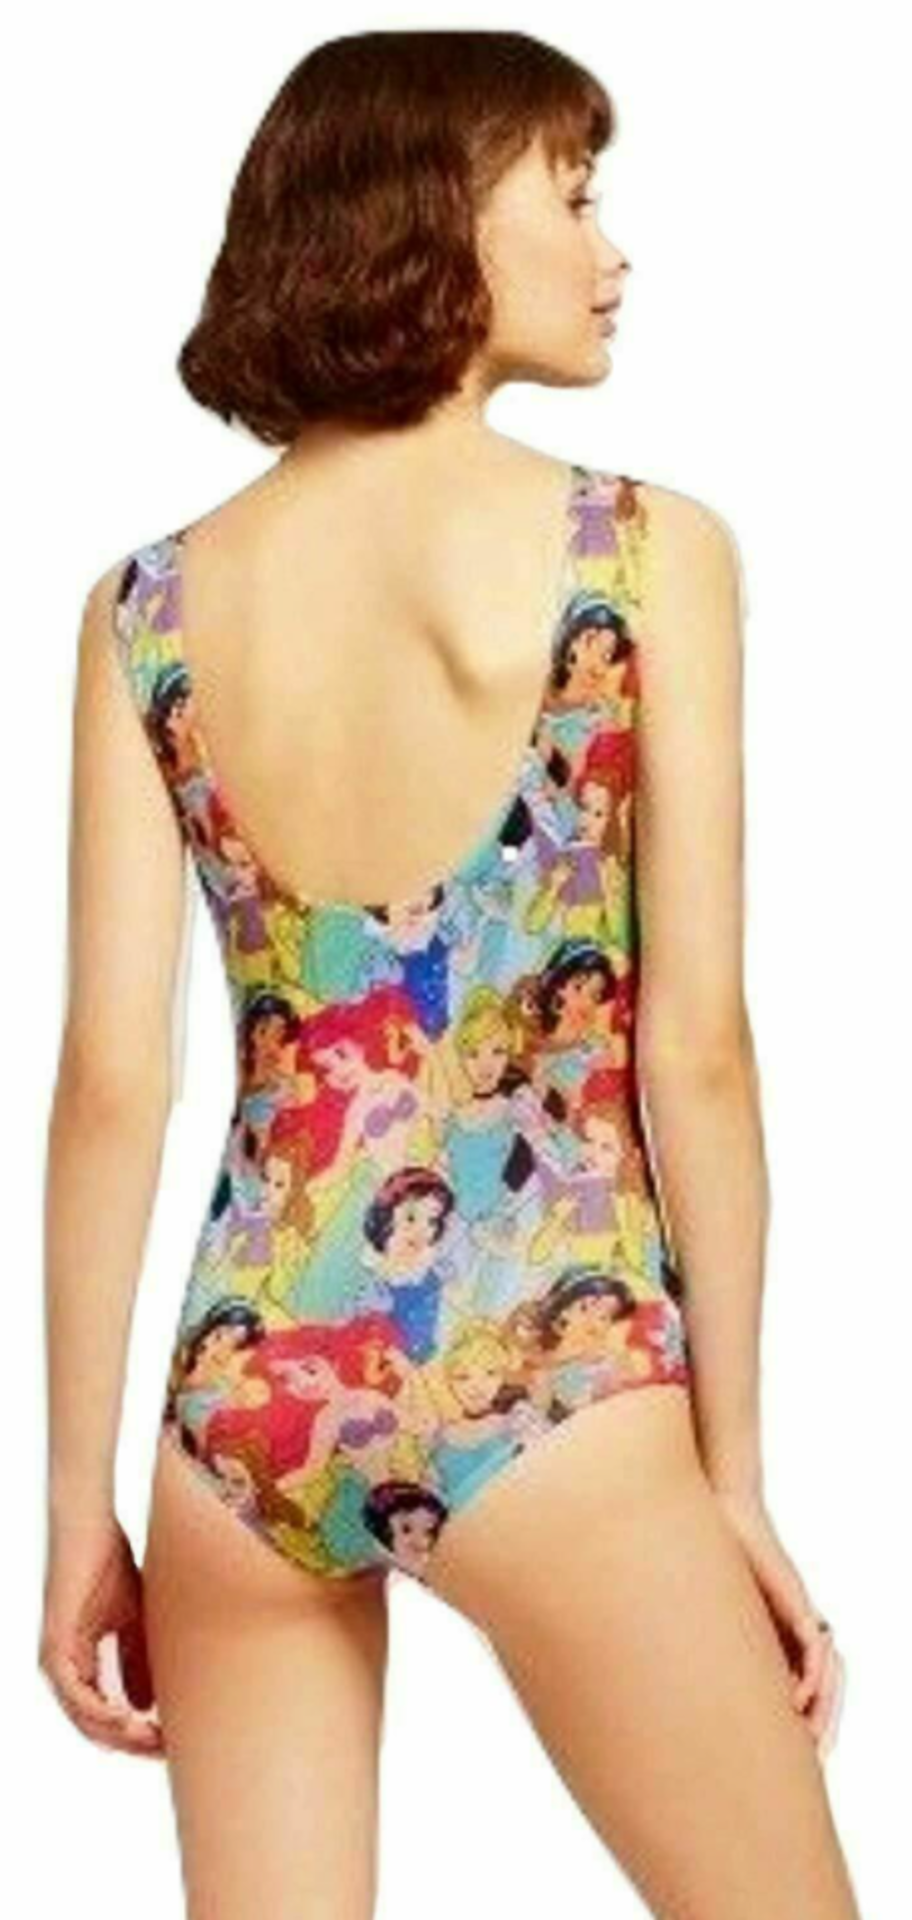 250 DISNEY'S PRINCESS TEEN GIRLS BODYSUIT, VARIOUS SIZES, NEW WITH TAGS - Image 6 of 7